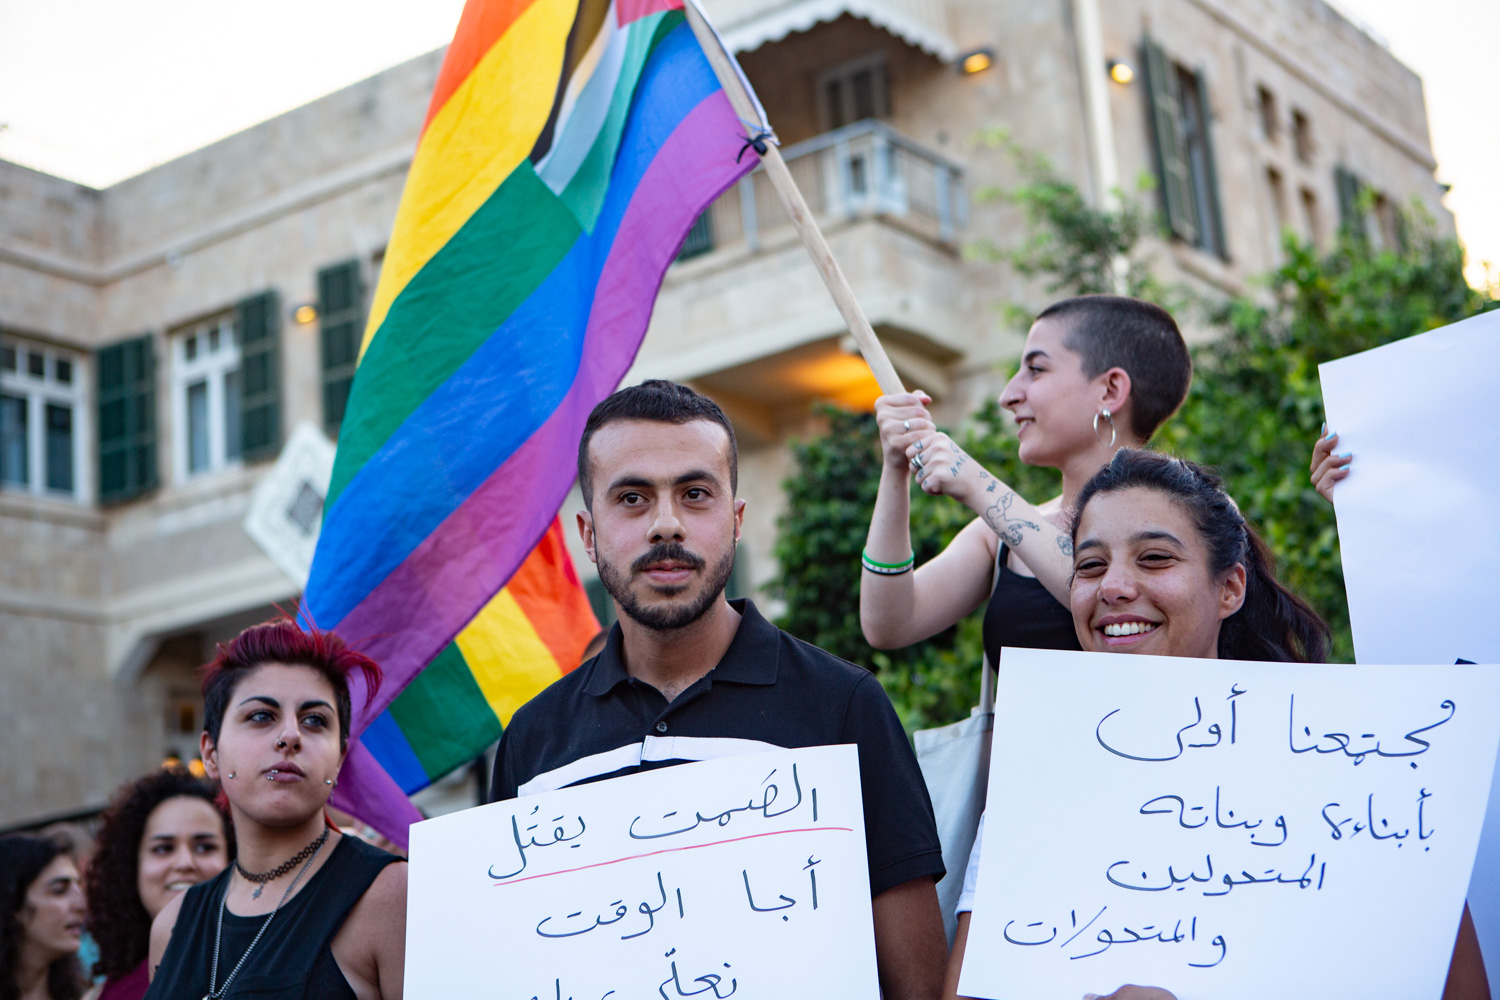 LGBTQ Palestinians take part in a protest following the stabbing of a queer Arab teen in Tel Aviv, August 1, 2019. (Mati Milstein)